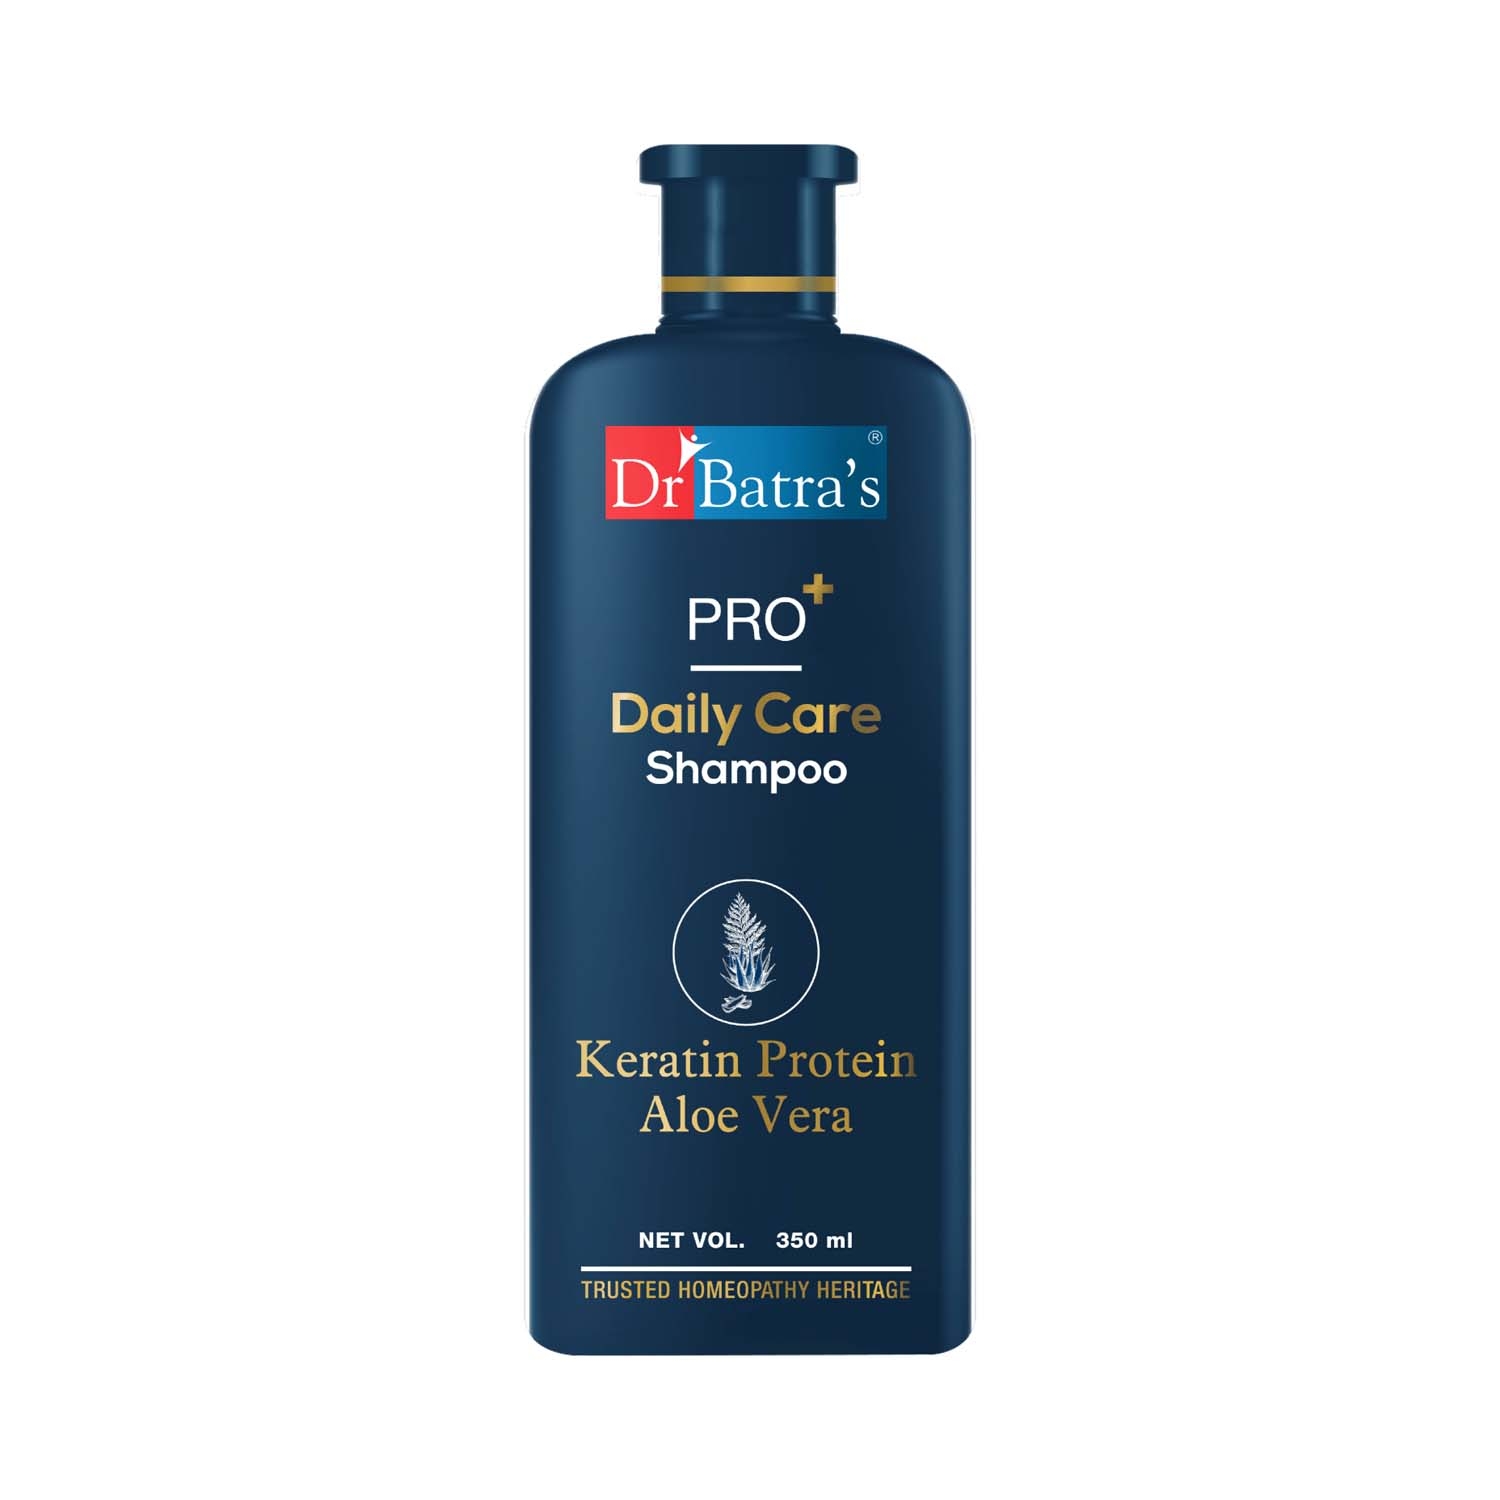 Dr Batra's Pro Daily Care Enriched With Keratin Protein Shampoo (350ml)